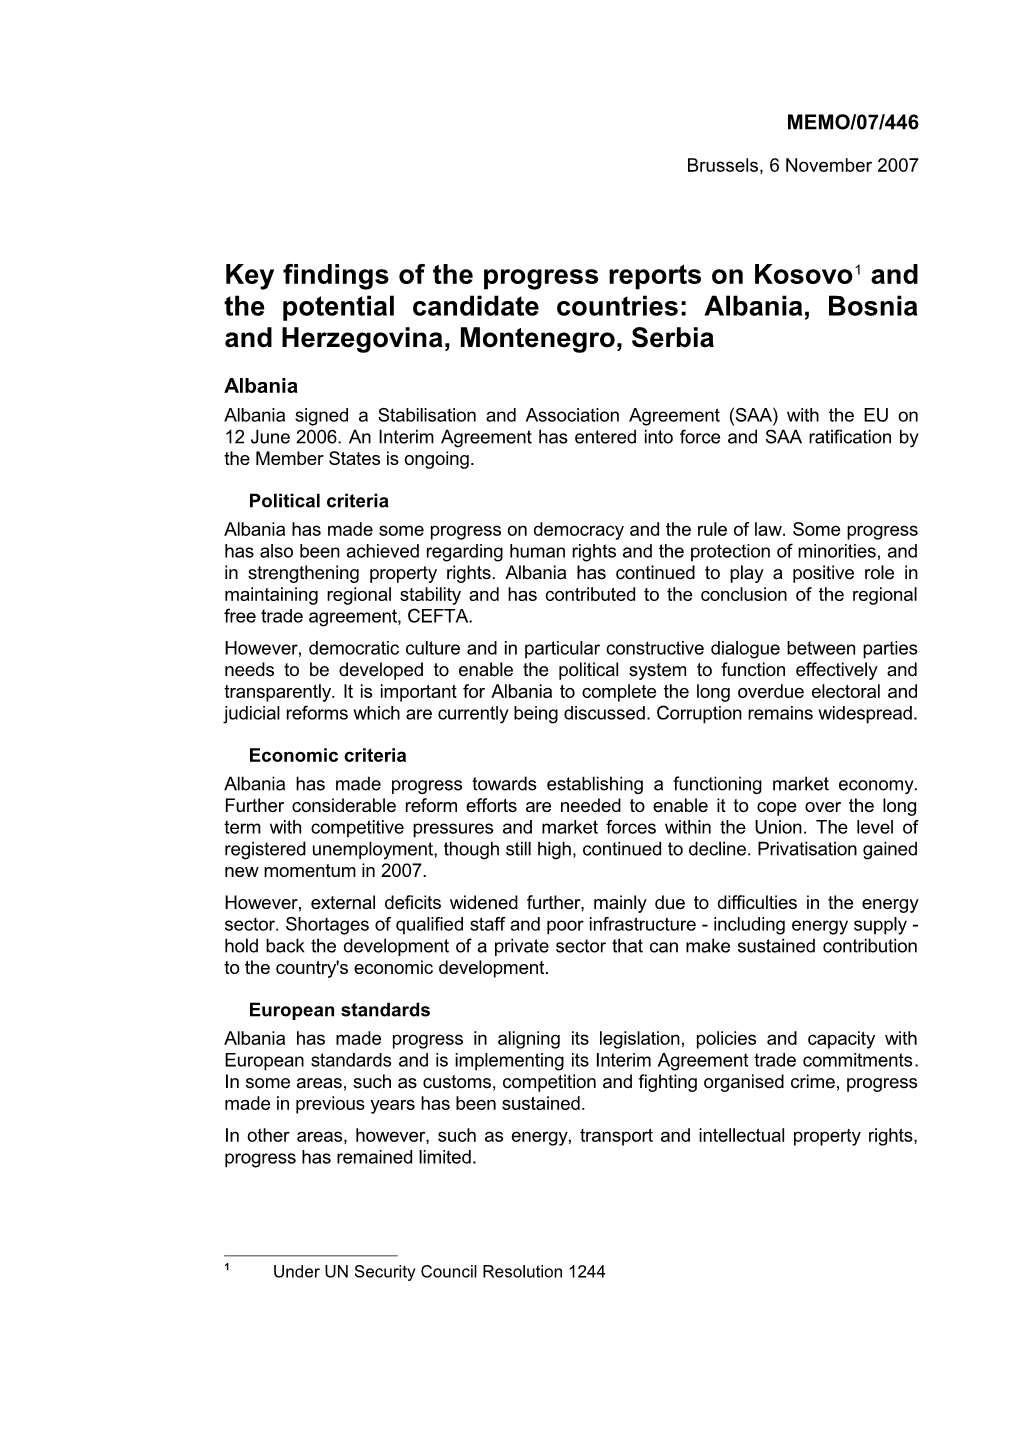 Key Findings of the Progress Reports on Kosovo 1 and the Potential Candidate Countries